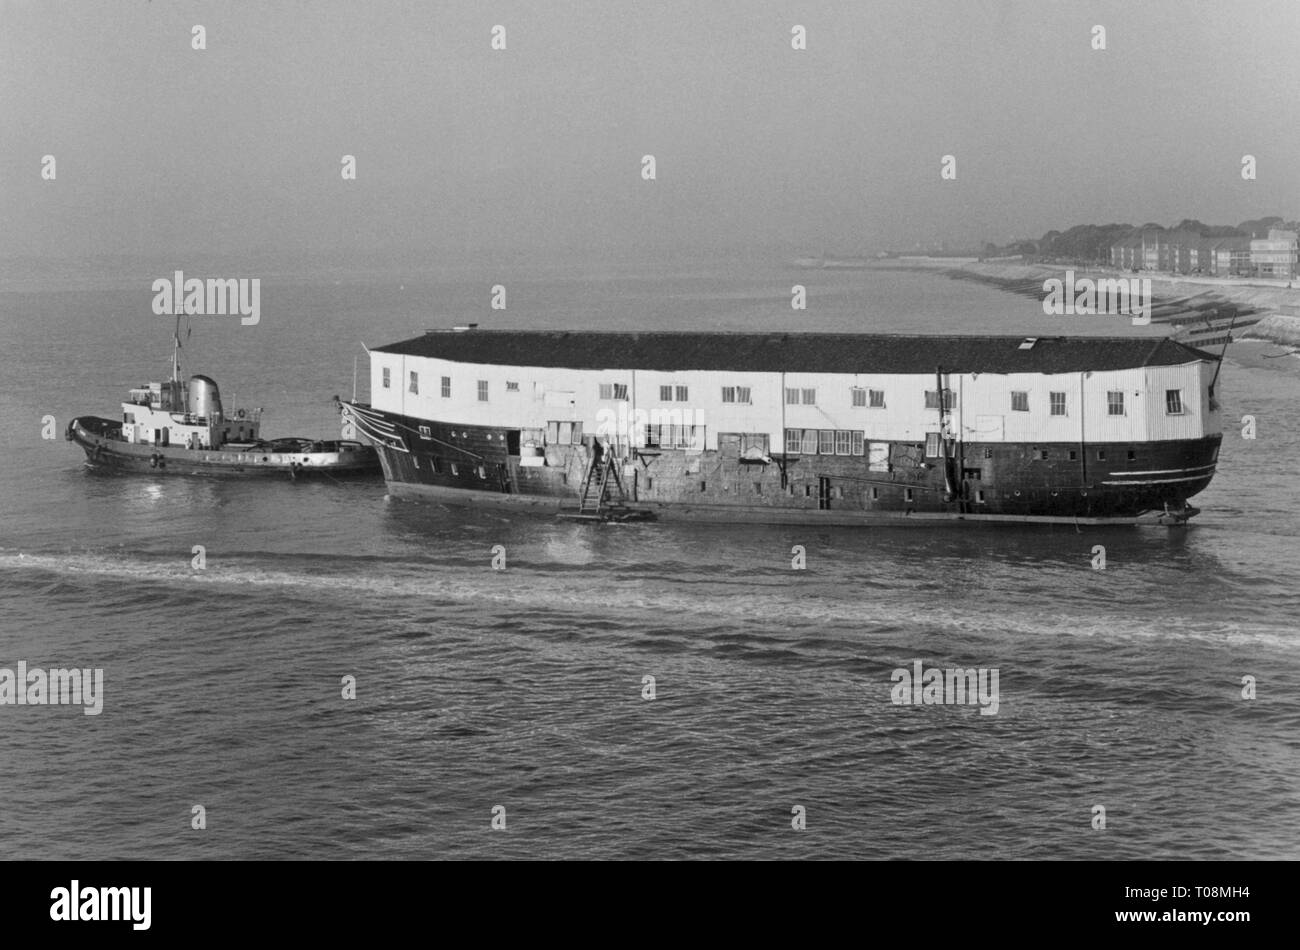 AJAXNETPHOTO. 1971. PORTSMOUTH, ENGLAND. - VETERAN DEPARTS - THE HULK OF EX HMS GANNET (EX GANNET, EX T.S.MERCURY) BEING TOWED OUT OF THE NAVAL BASE AFTER A SHORT REFIT.  PHOTO:JONATHAN EASTLAND/AJAX REF:711912 Stock Photo